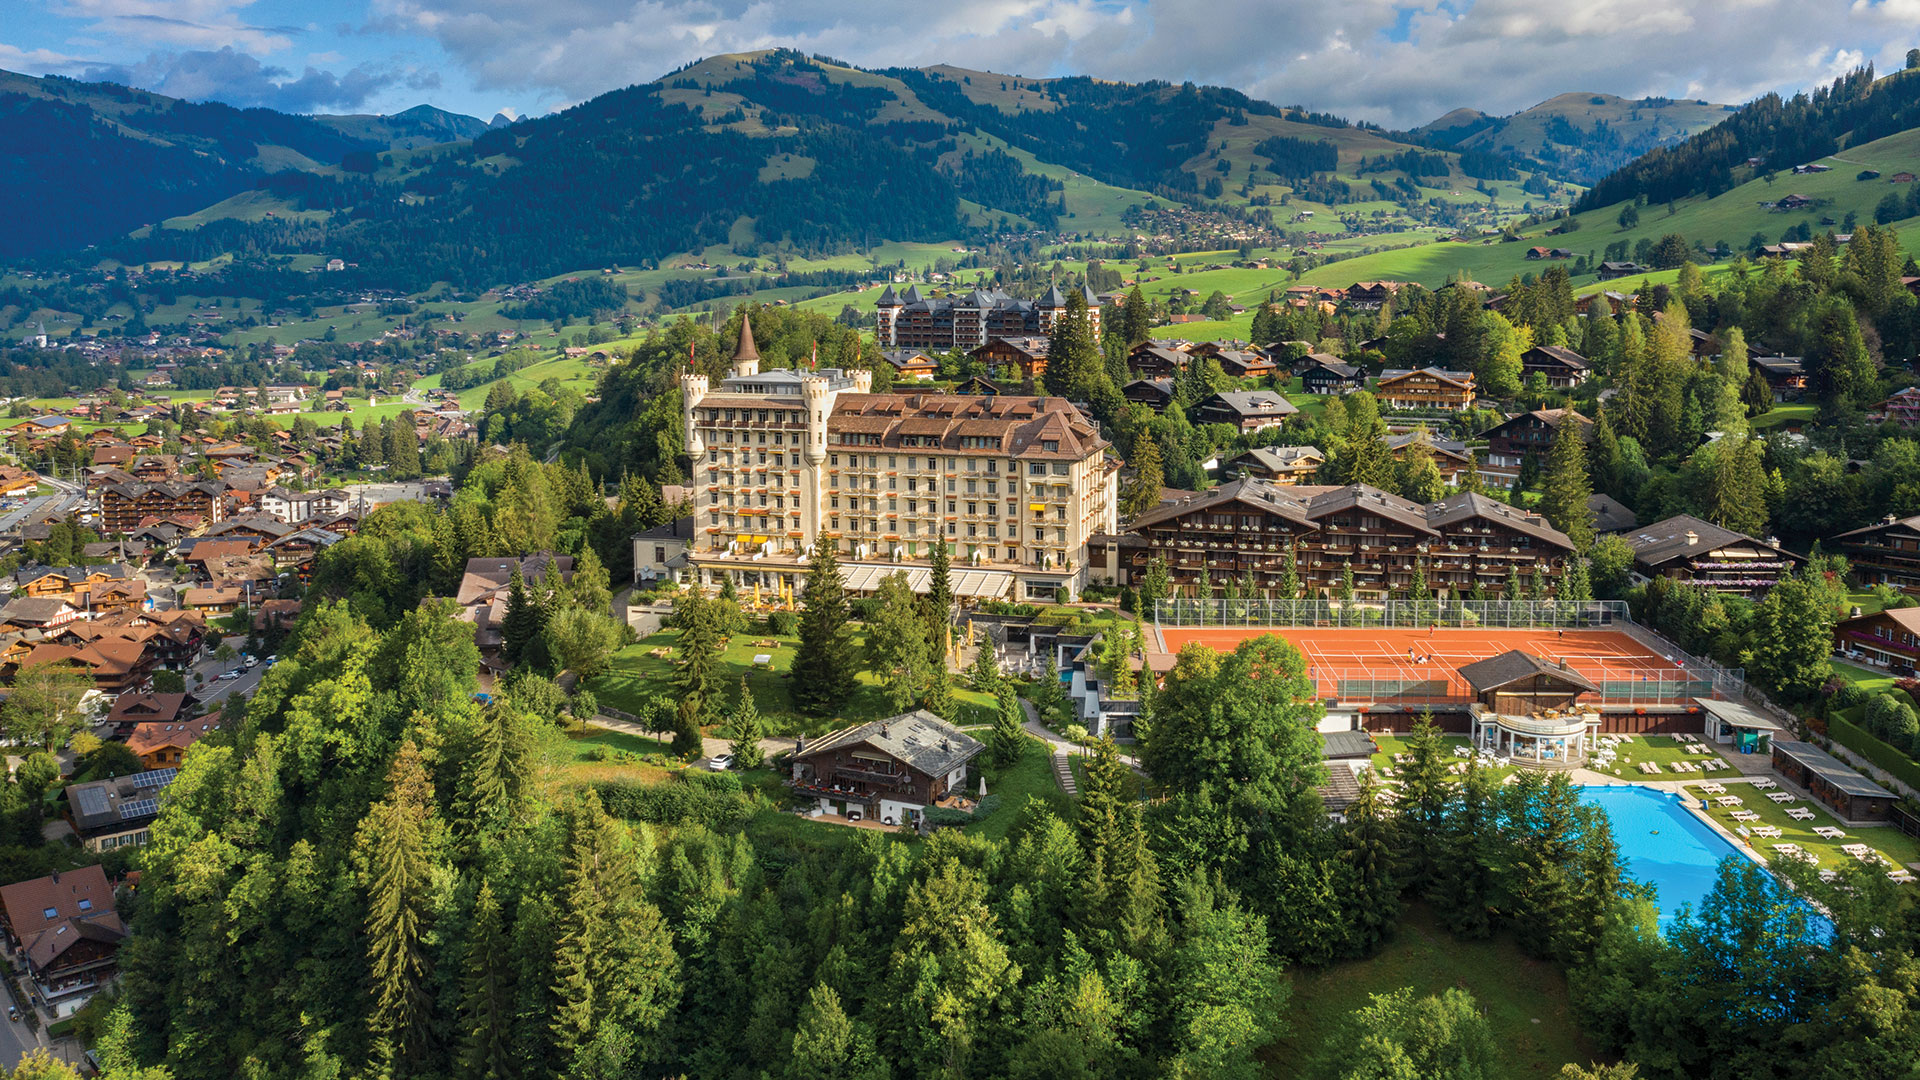 Das 5-Sterne Hotel Gstaad Palace – Hotspot in Gstaad